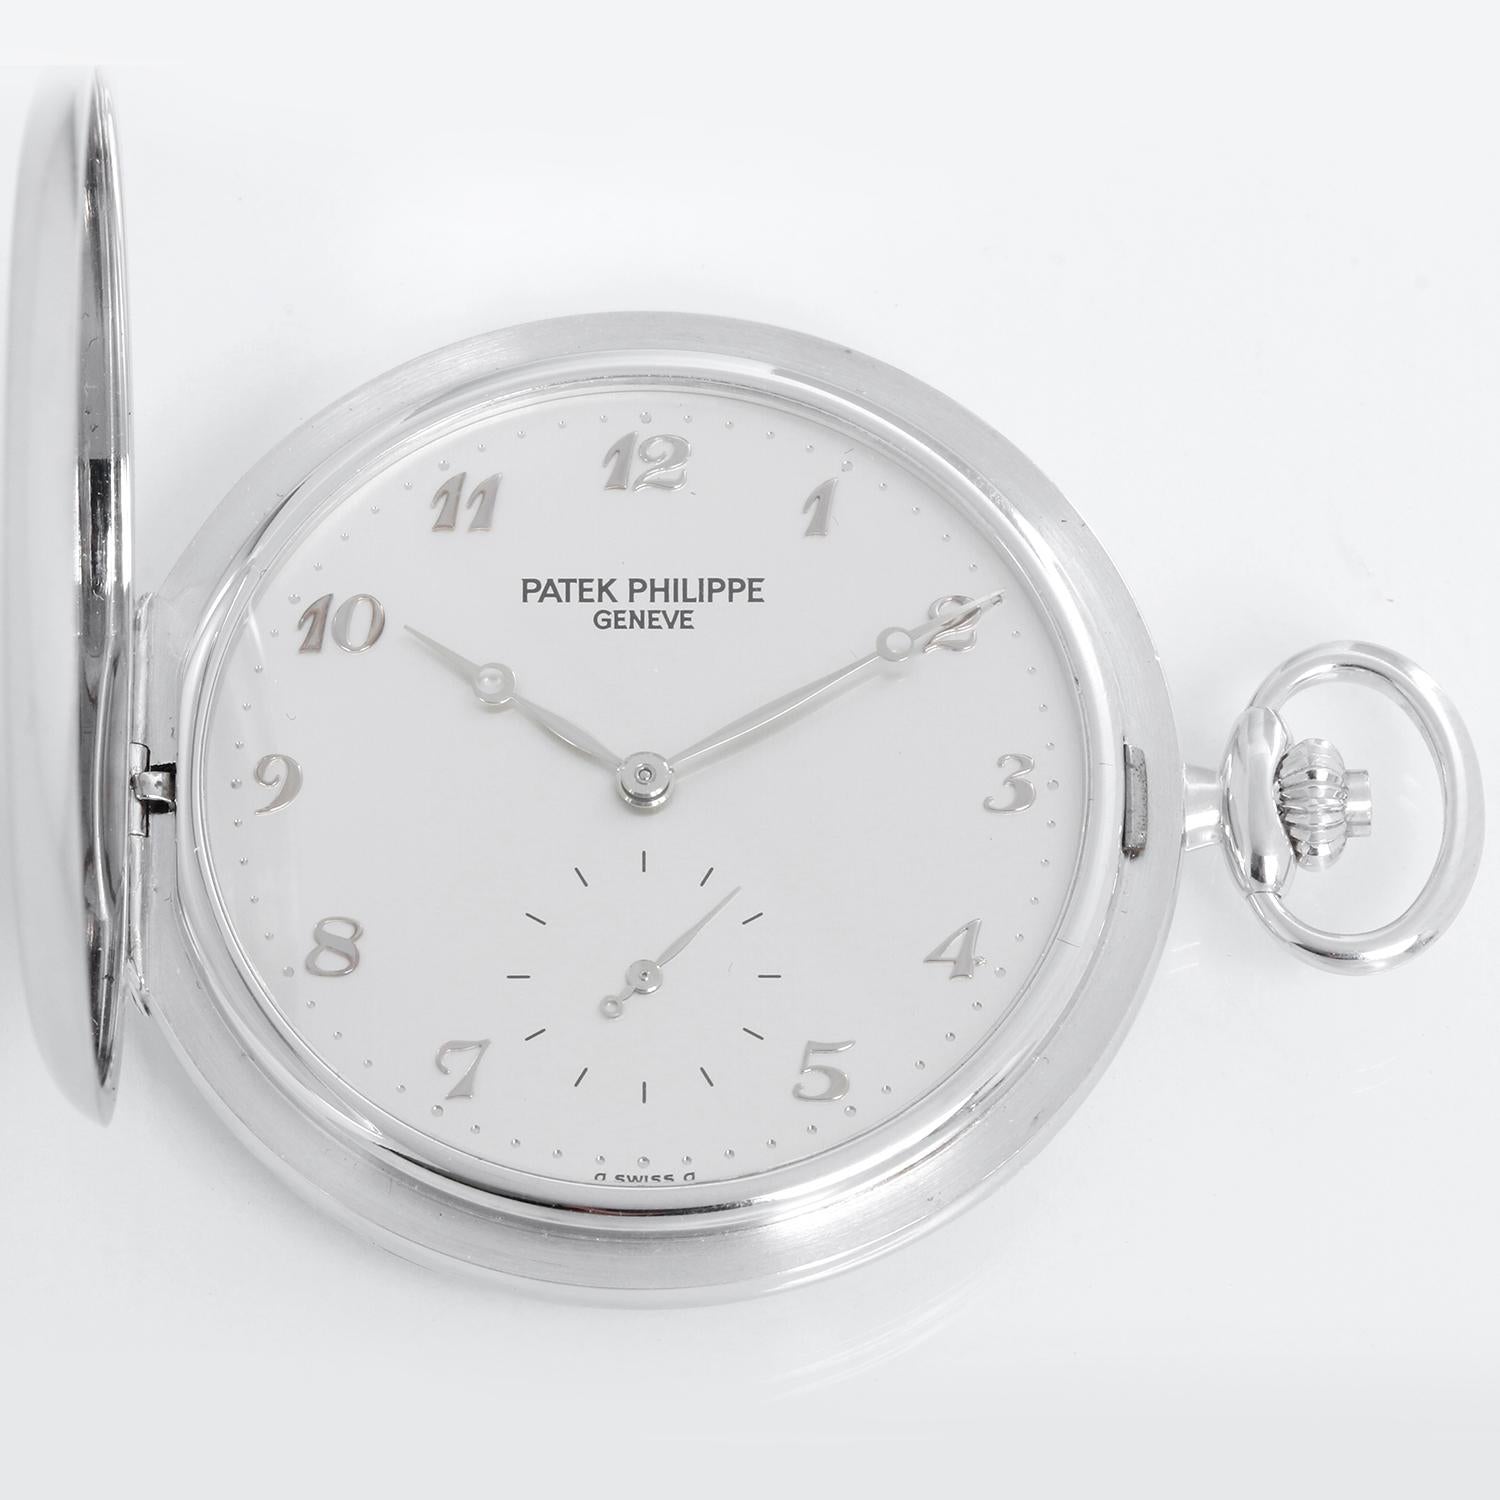 Extremely Rare Patek Philippe Heavy Hunter Case 18K White Gold Pocket Watch 980G - Manual winding. 18K White gold ( 48 mm ). Silver dial with applied white gold numerals. Comes as pictured with a matching 16-inch 18K white gold Patek Philippe marked